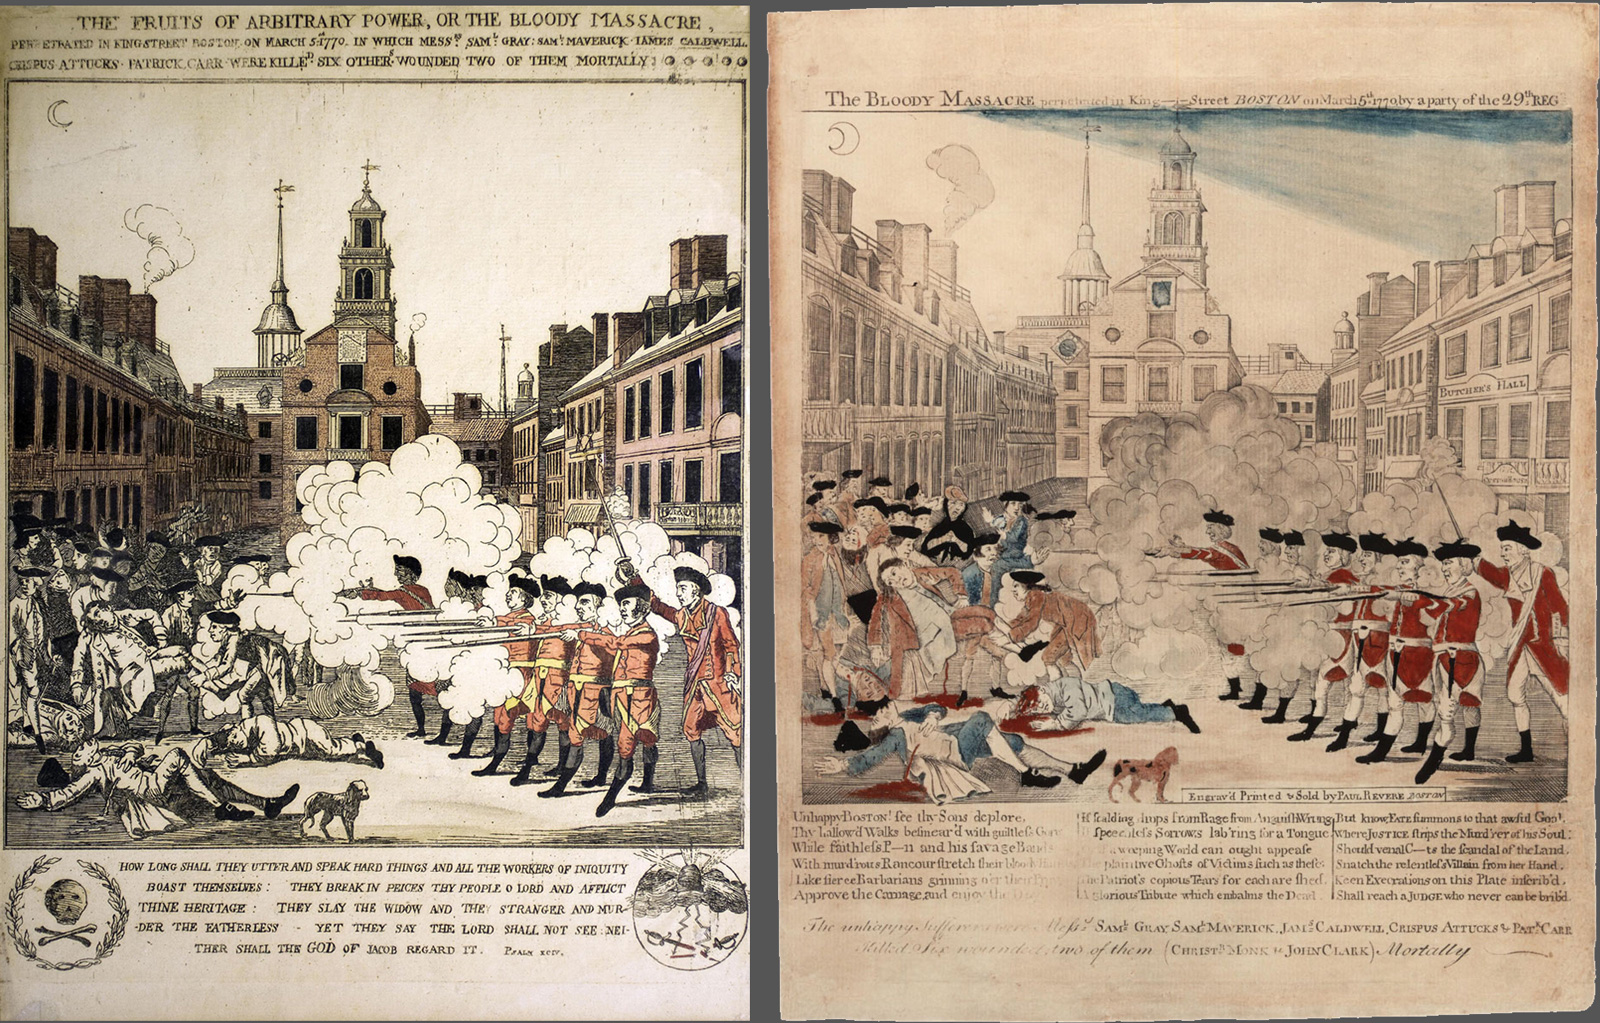 From left:Henry Pelham, The Fruits of Arbitrary Power, or The Bloody Massacre. Engraving, 1770.Paul Revere, The Bloody Massacre perpetrated in King Street Boston on March 5th 1770 by a party of the 29th Regt. Engraving, 1770.